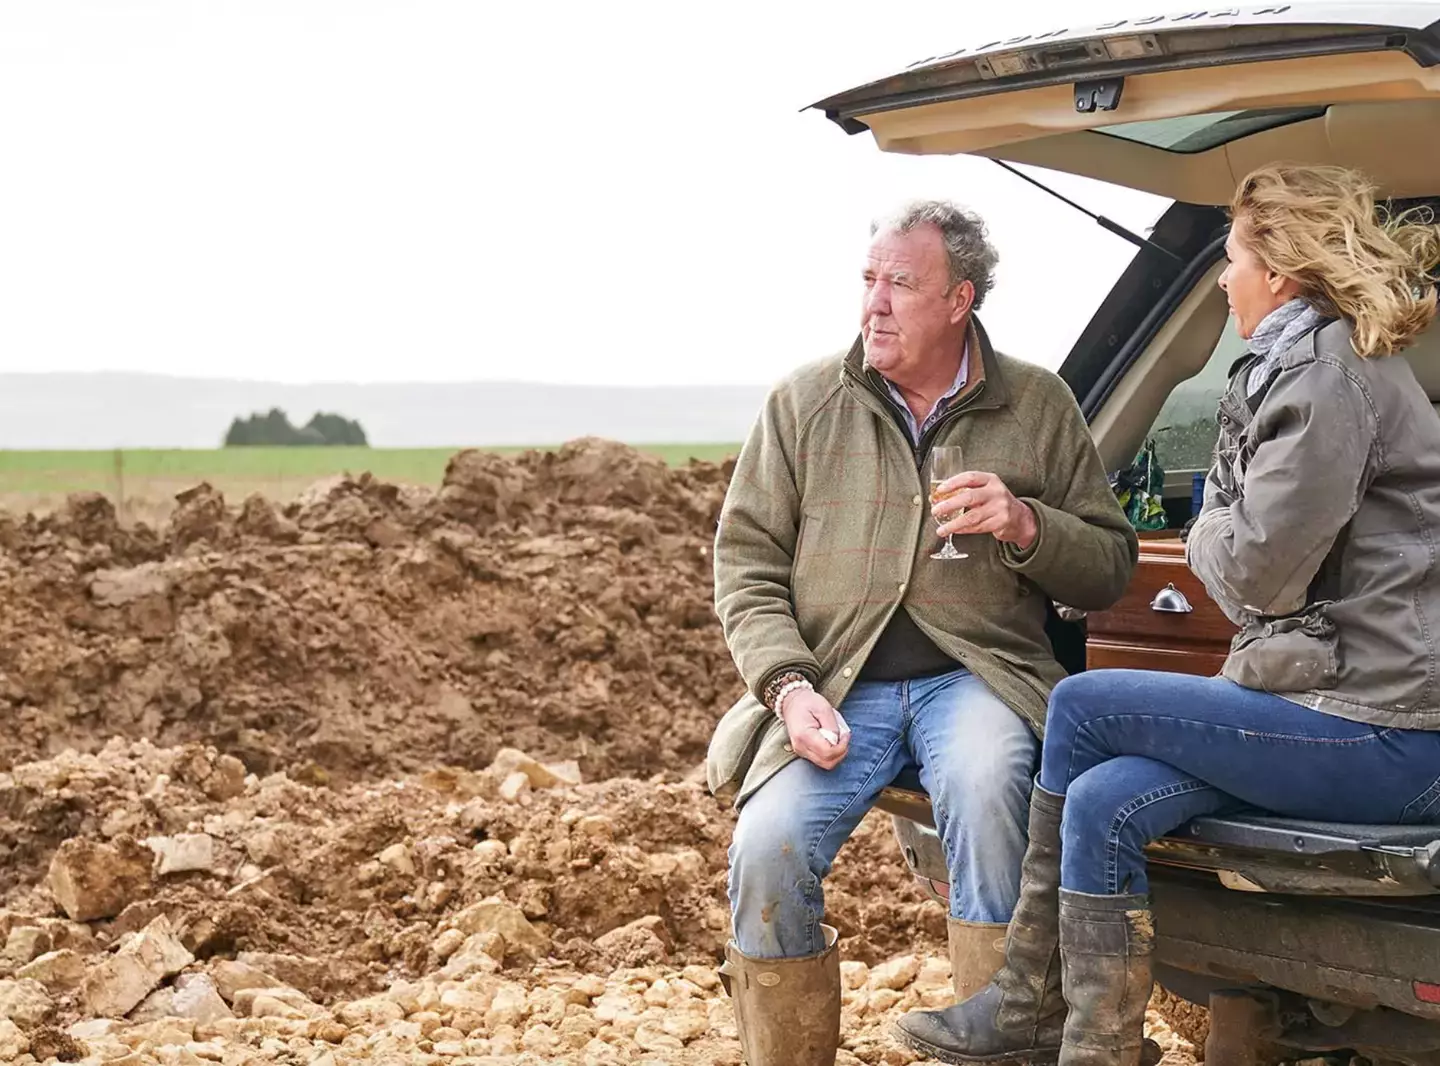 Clarkson's Farm producer Andy Wilman said the show could keep going as long as Clarkson still feels like he's got something to say. (Prime Video)